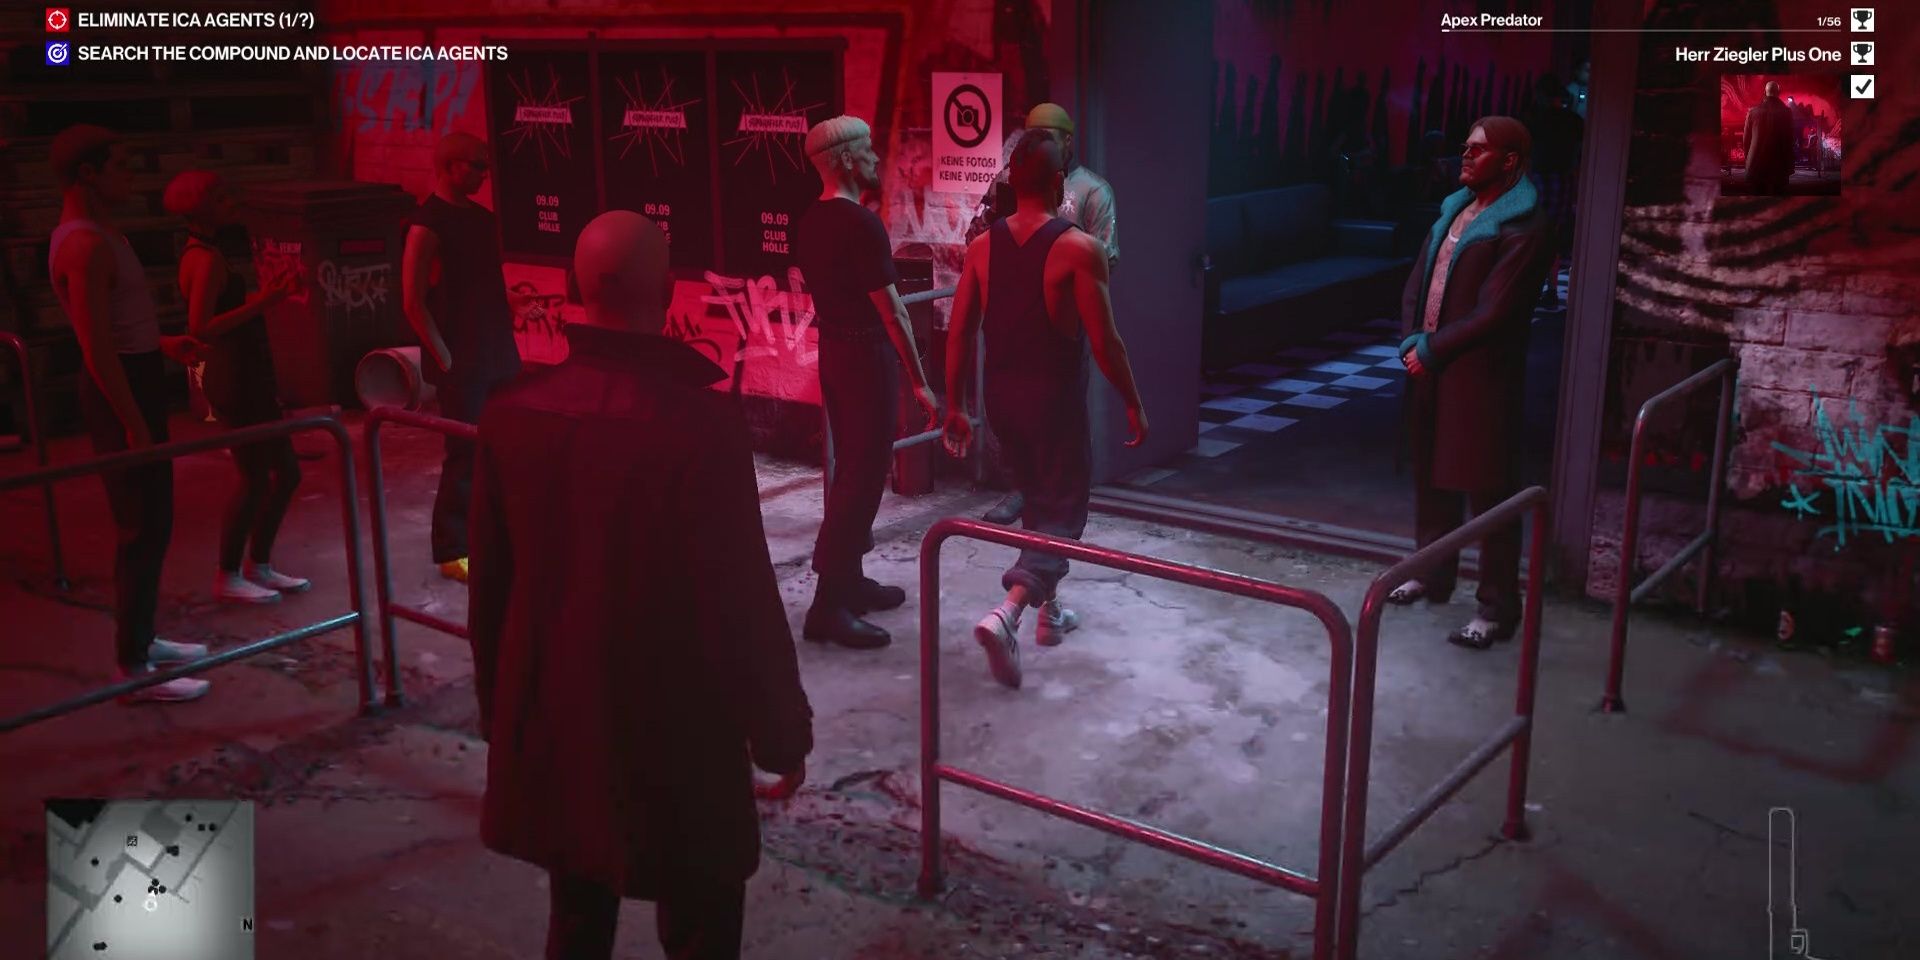 Herr Ziegler Plus One - Agent 47 Waiting To Get Into The Club